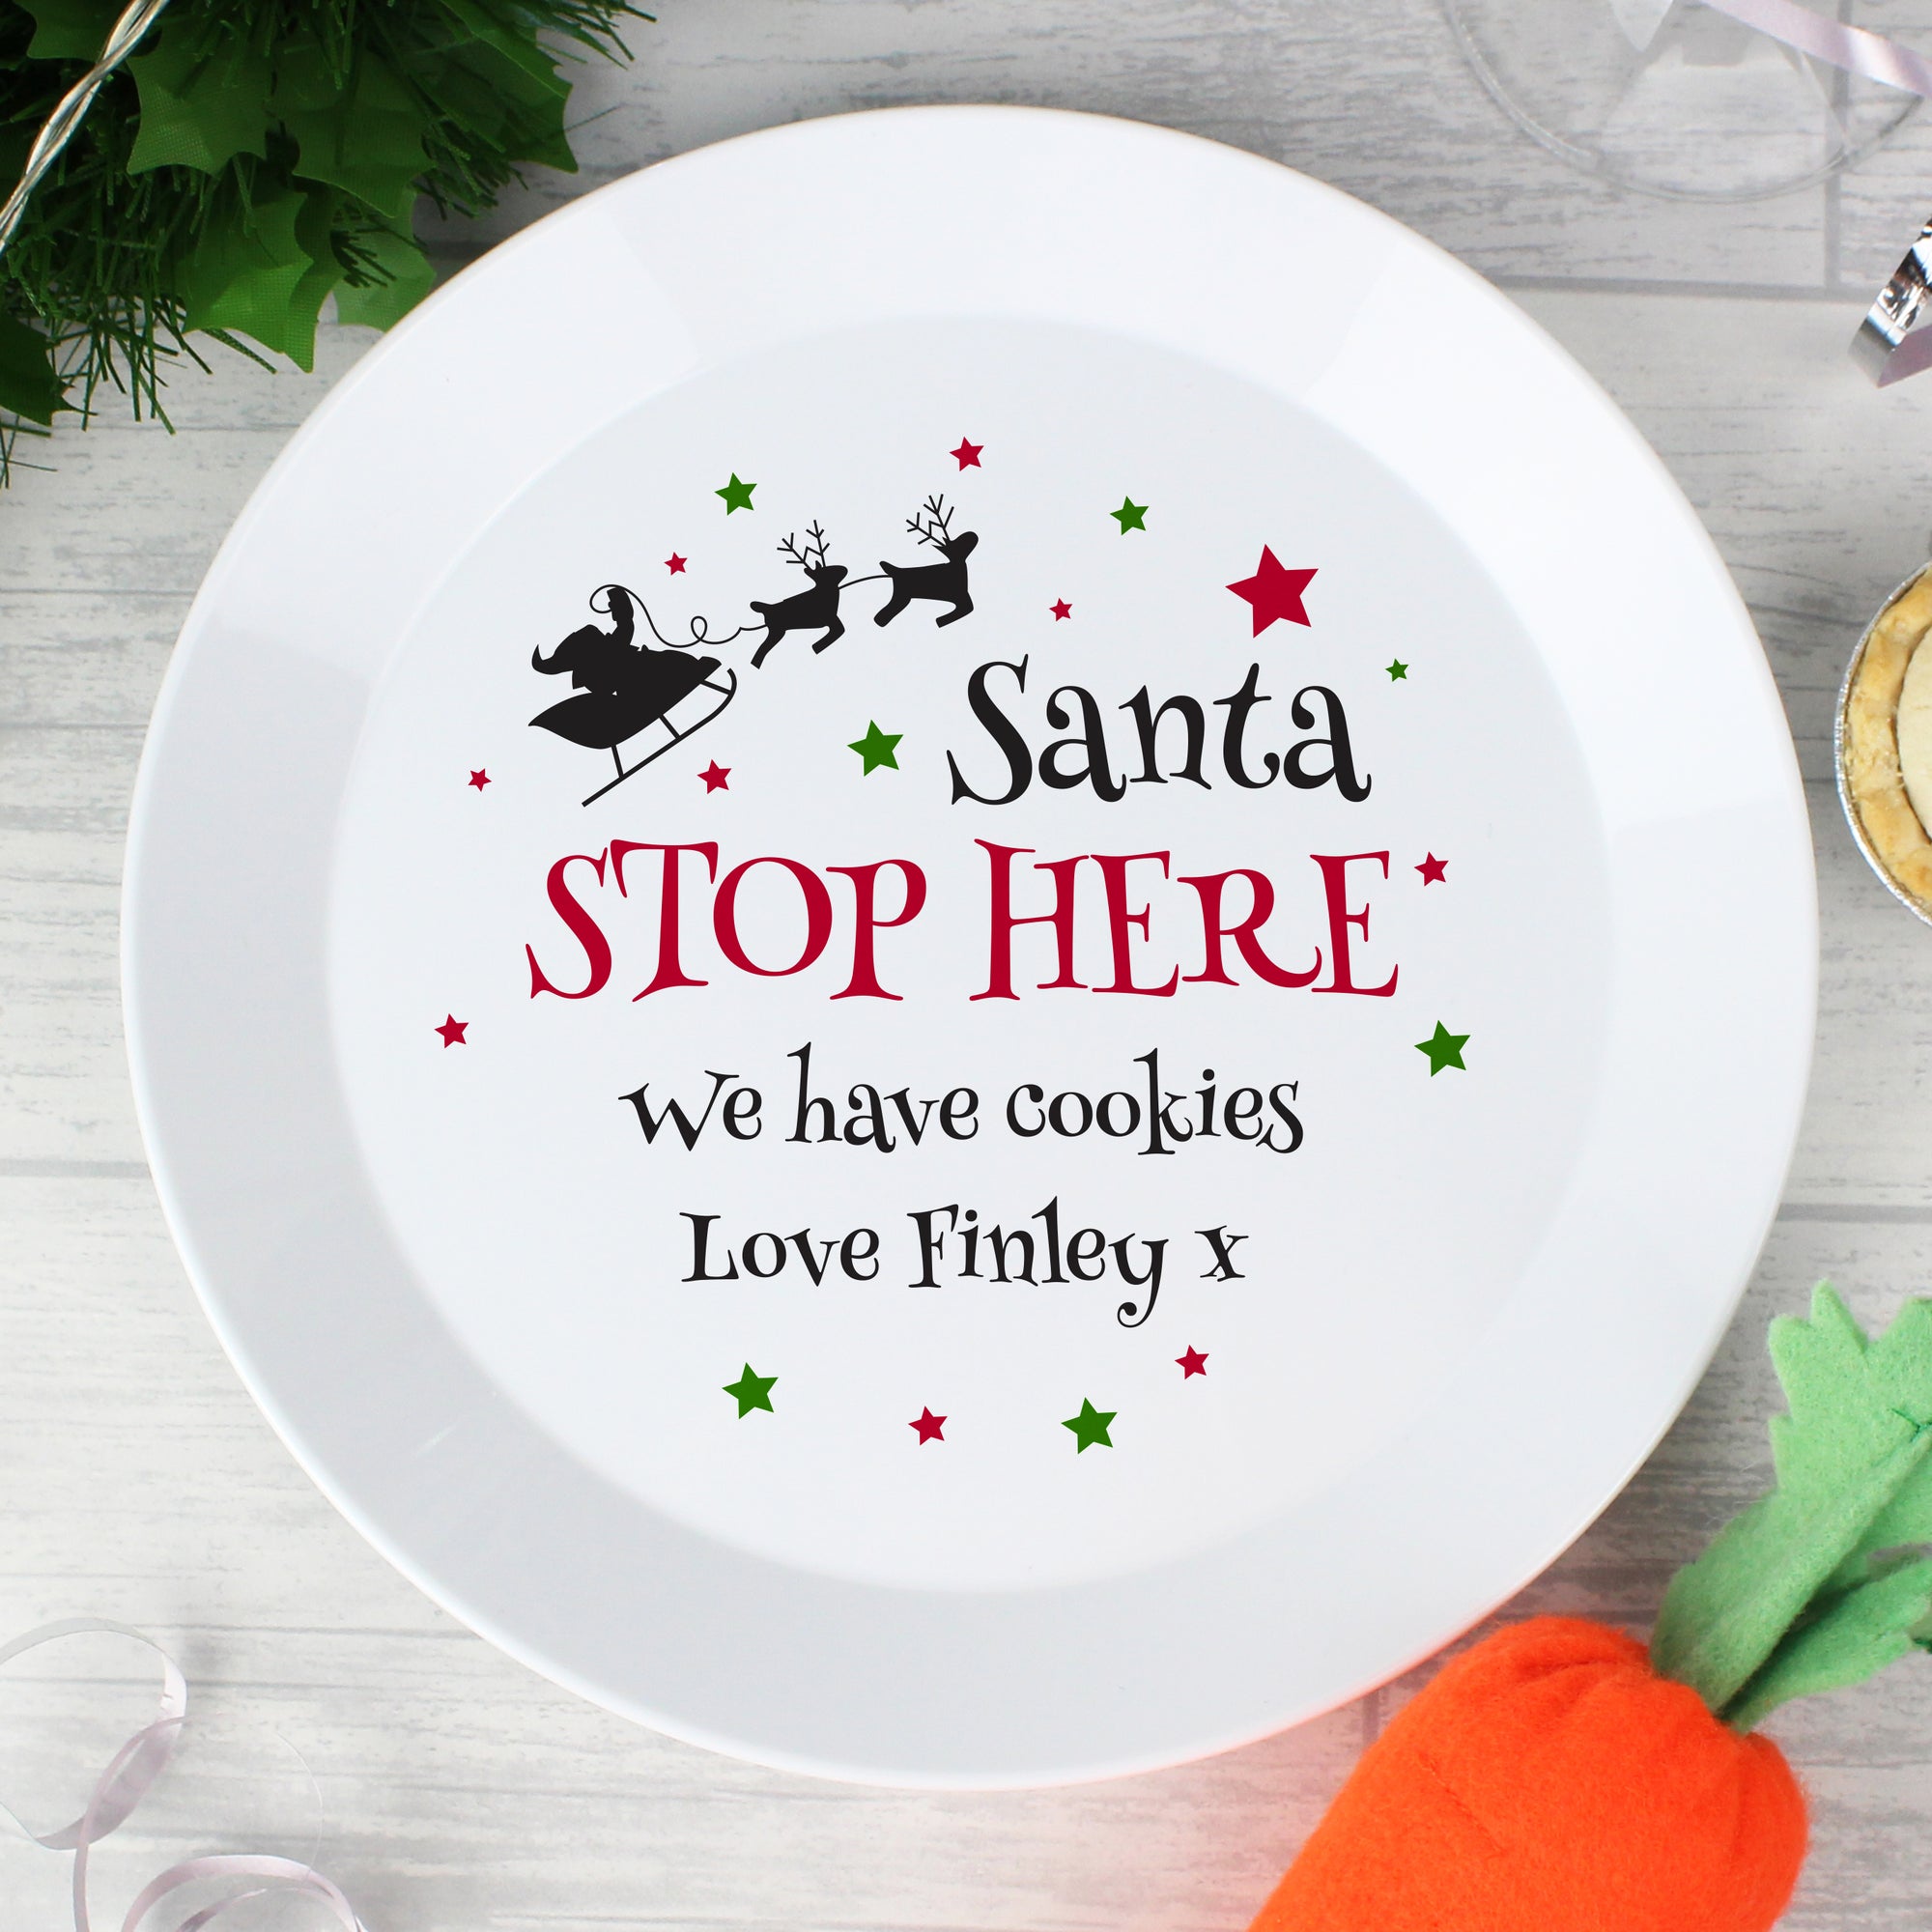 Personalised Christmas Eve Plate featuring the wording 'Santa STOP HERE' in black and red which can then be personalised with your own message over 2 lines of up to 20 characters per line. Made from white shatter-proof BPA free plastic.